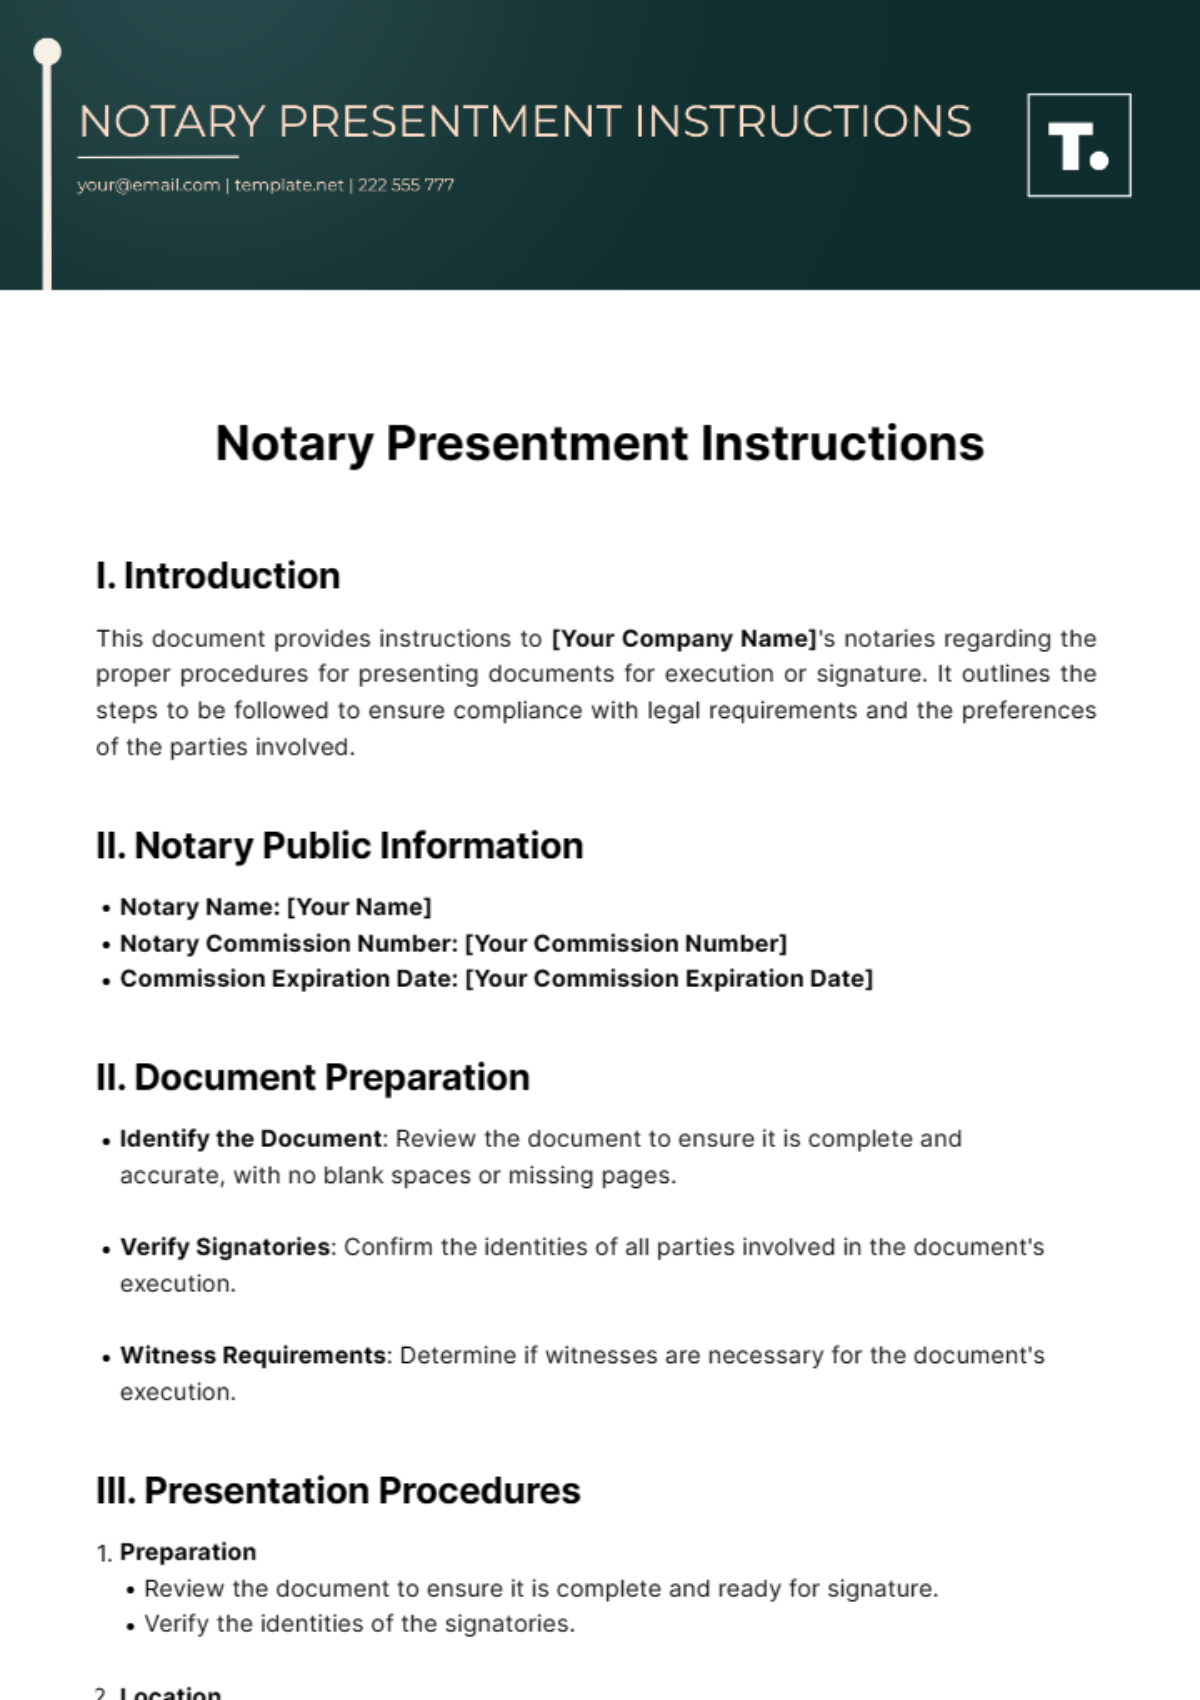 Notary Presentment Instructions Template